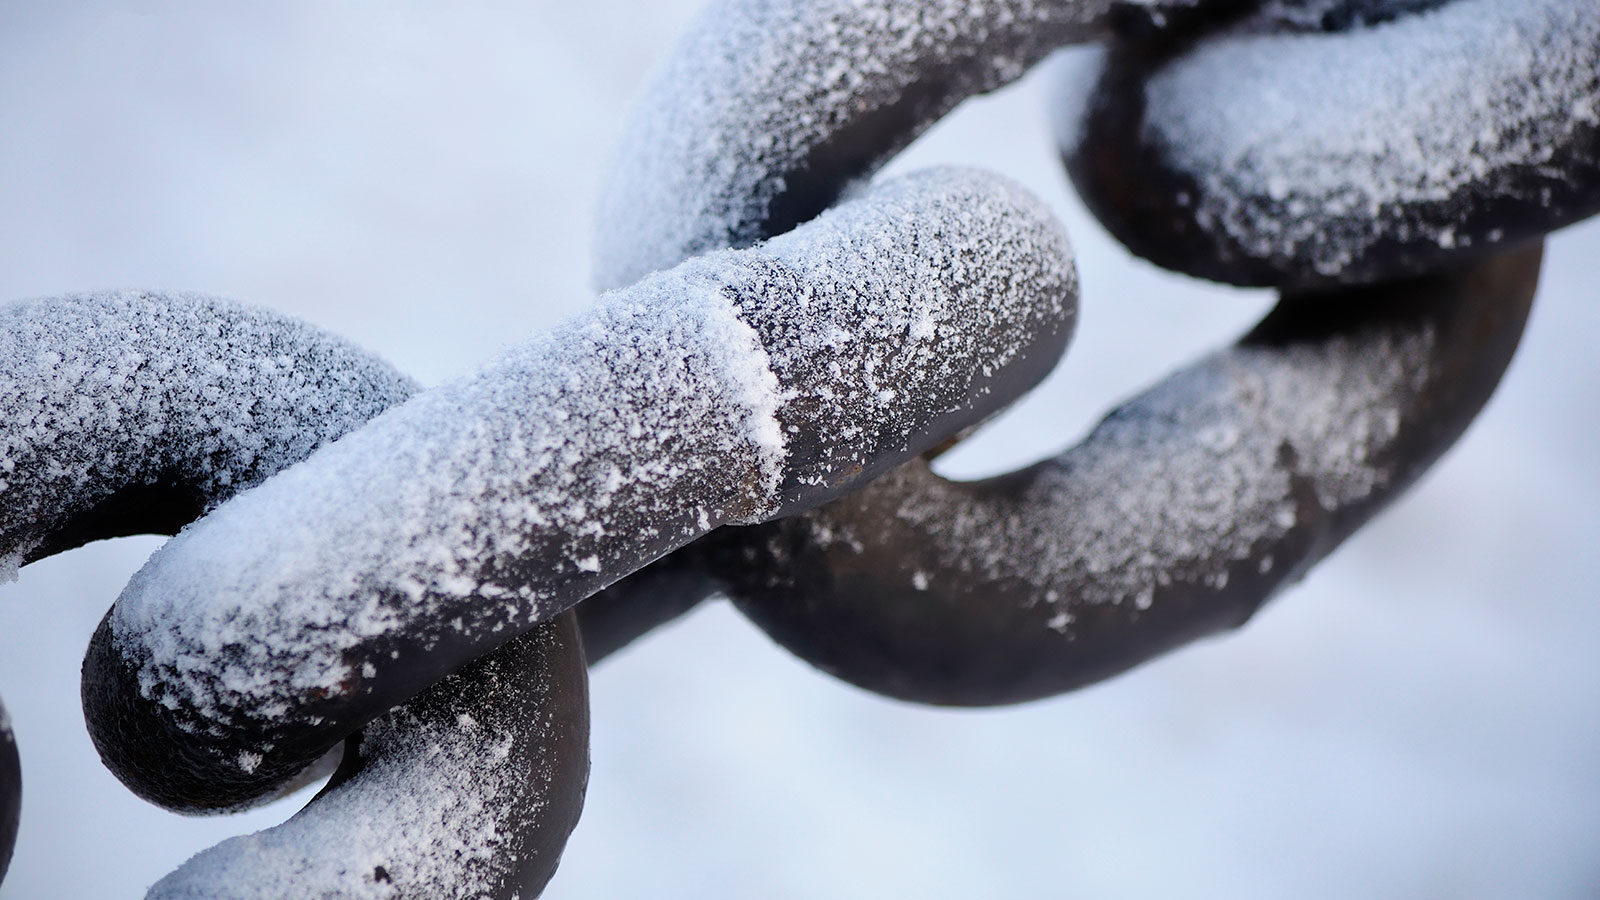 Steel chains covered in snow